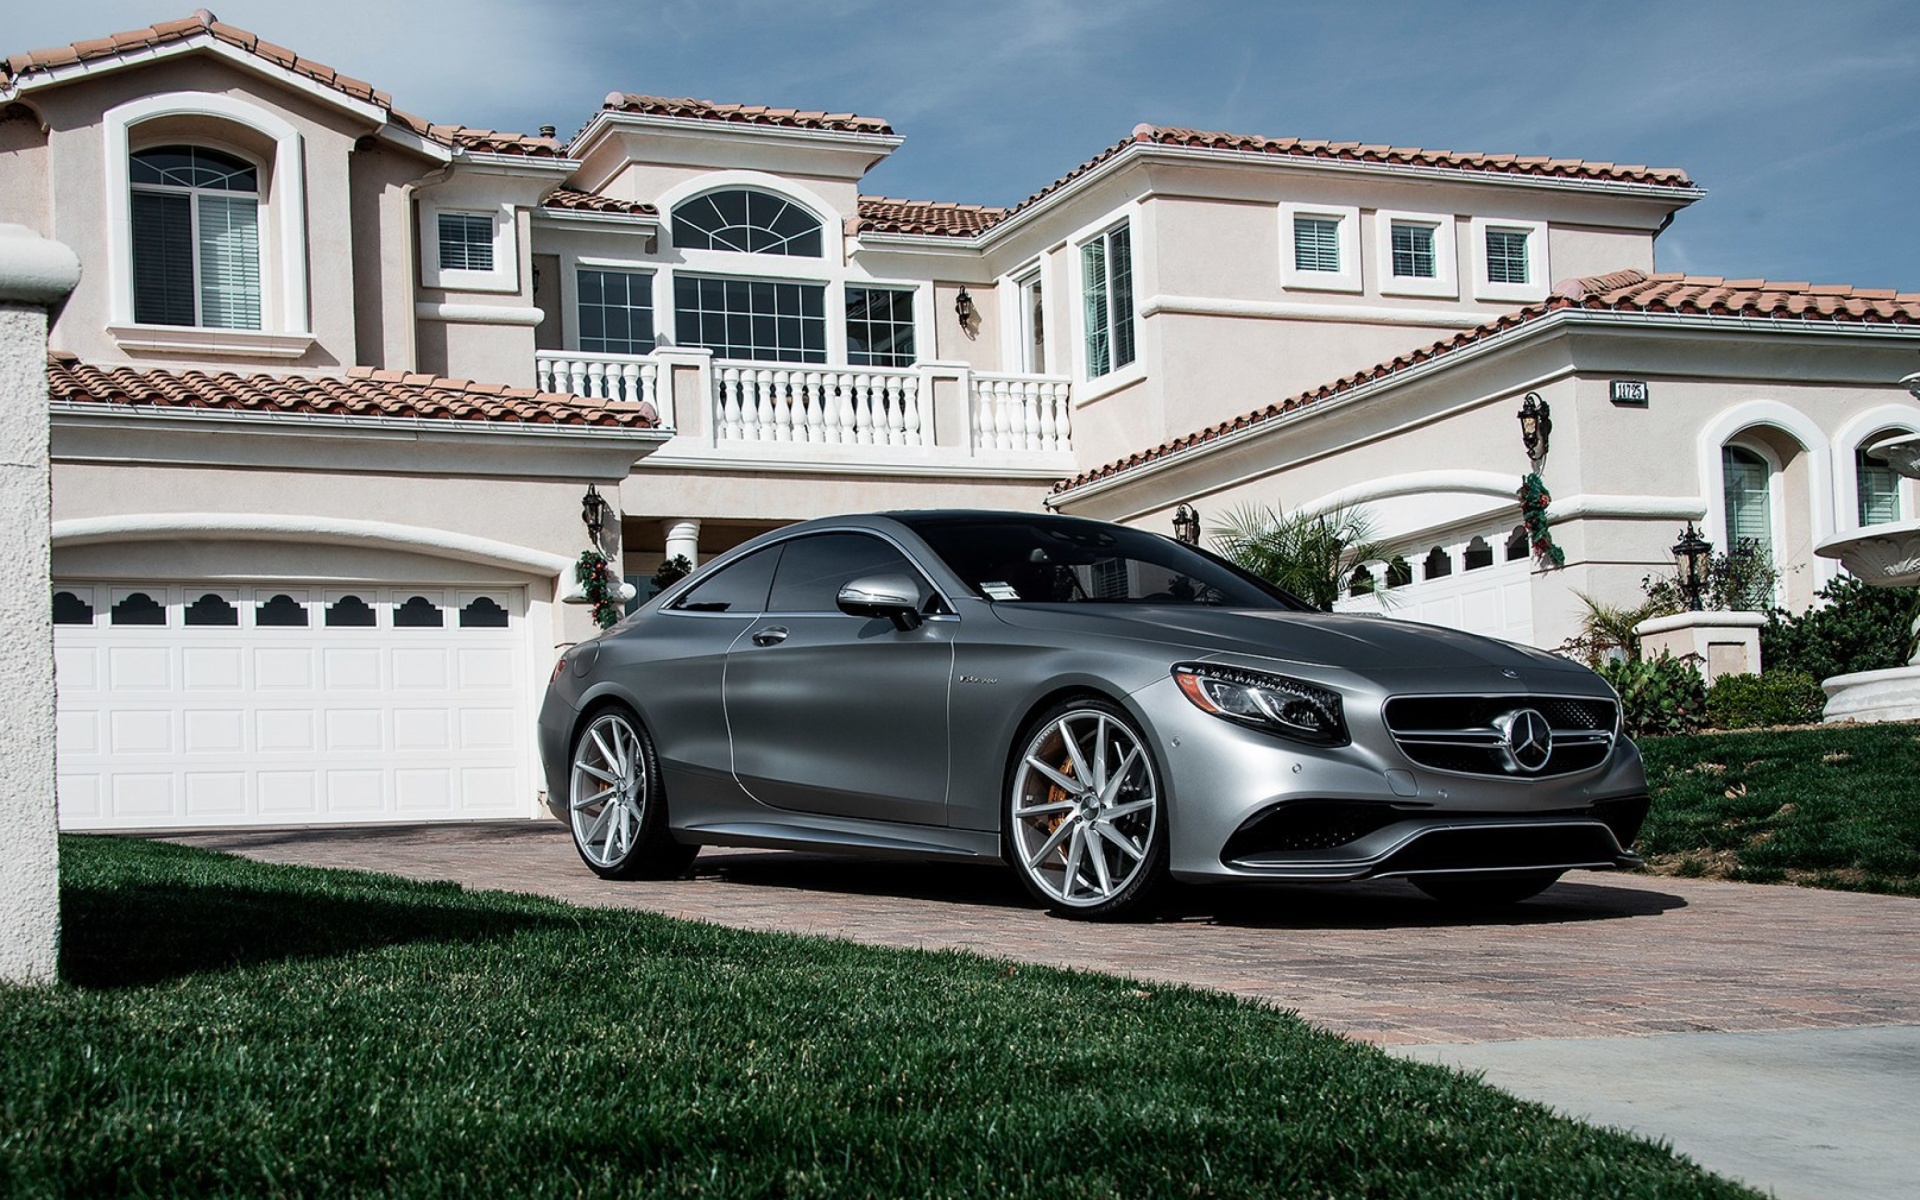 Mercedes Benz S63 AMG Coupe wallpaper 1920x1200